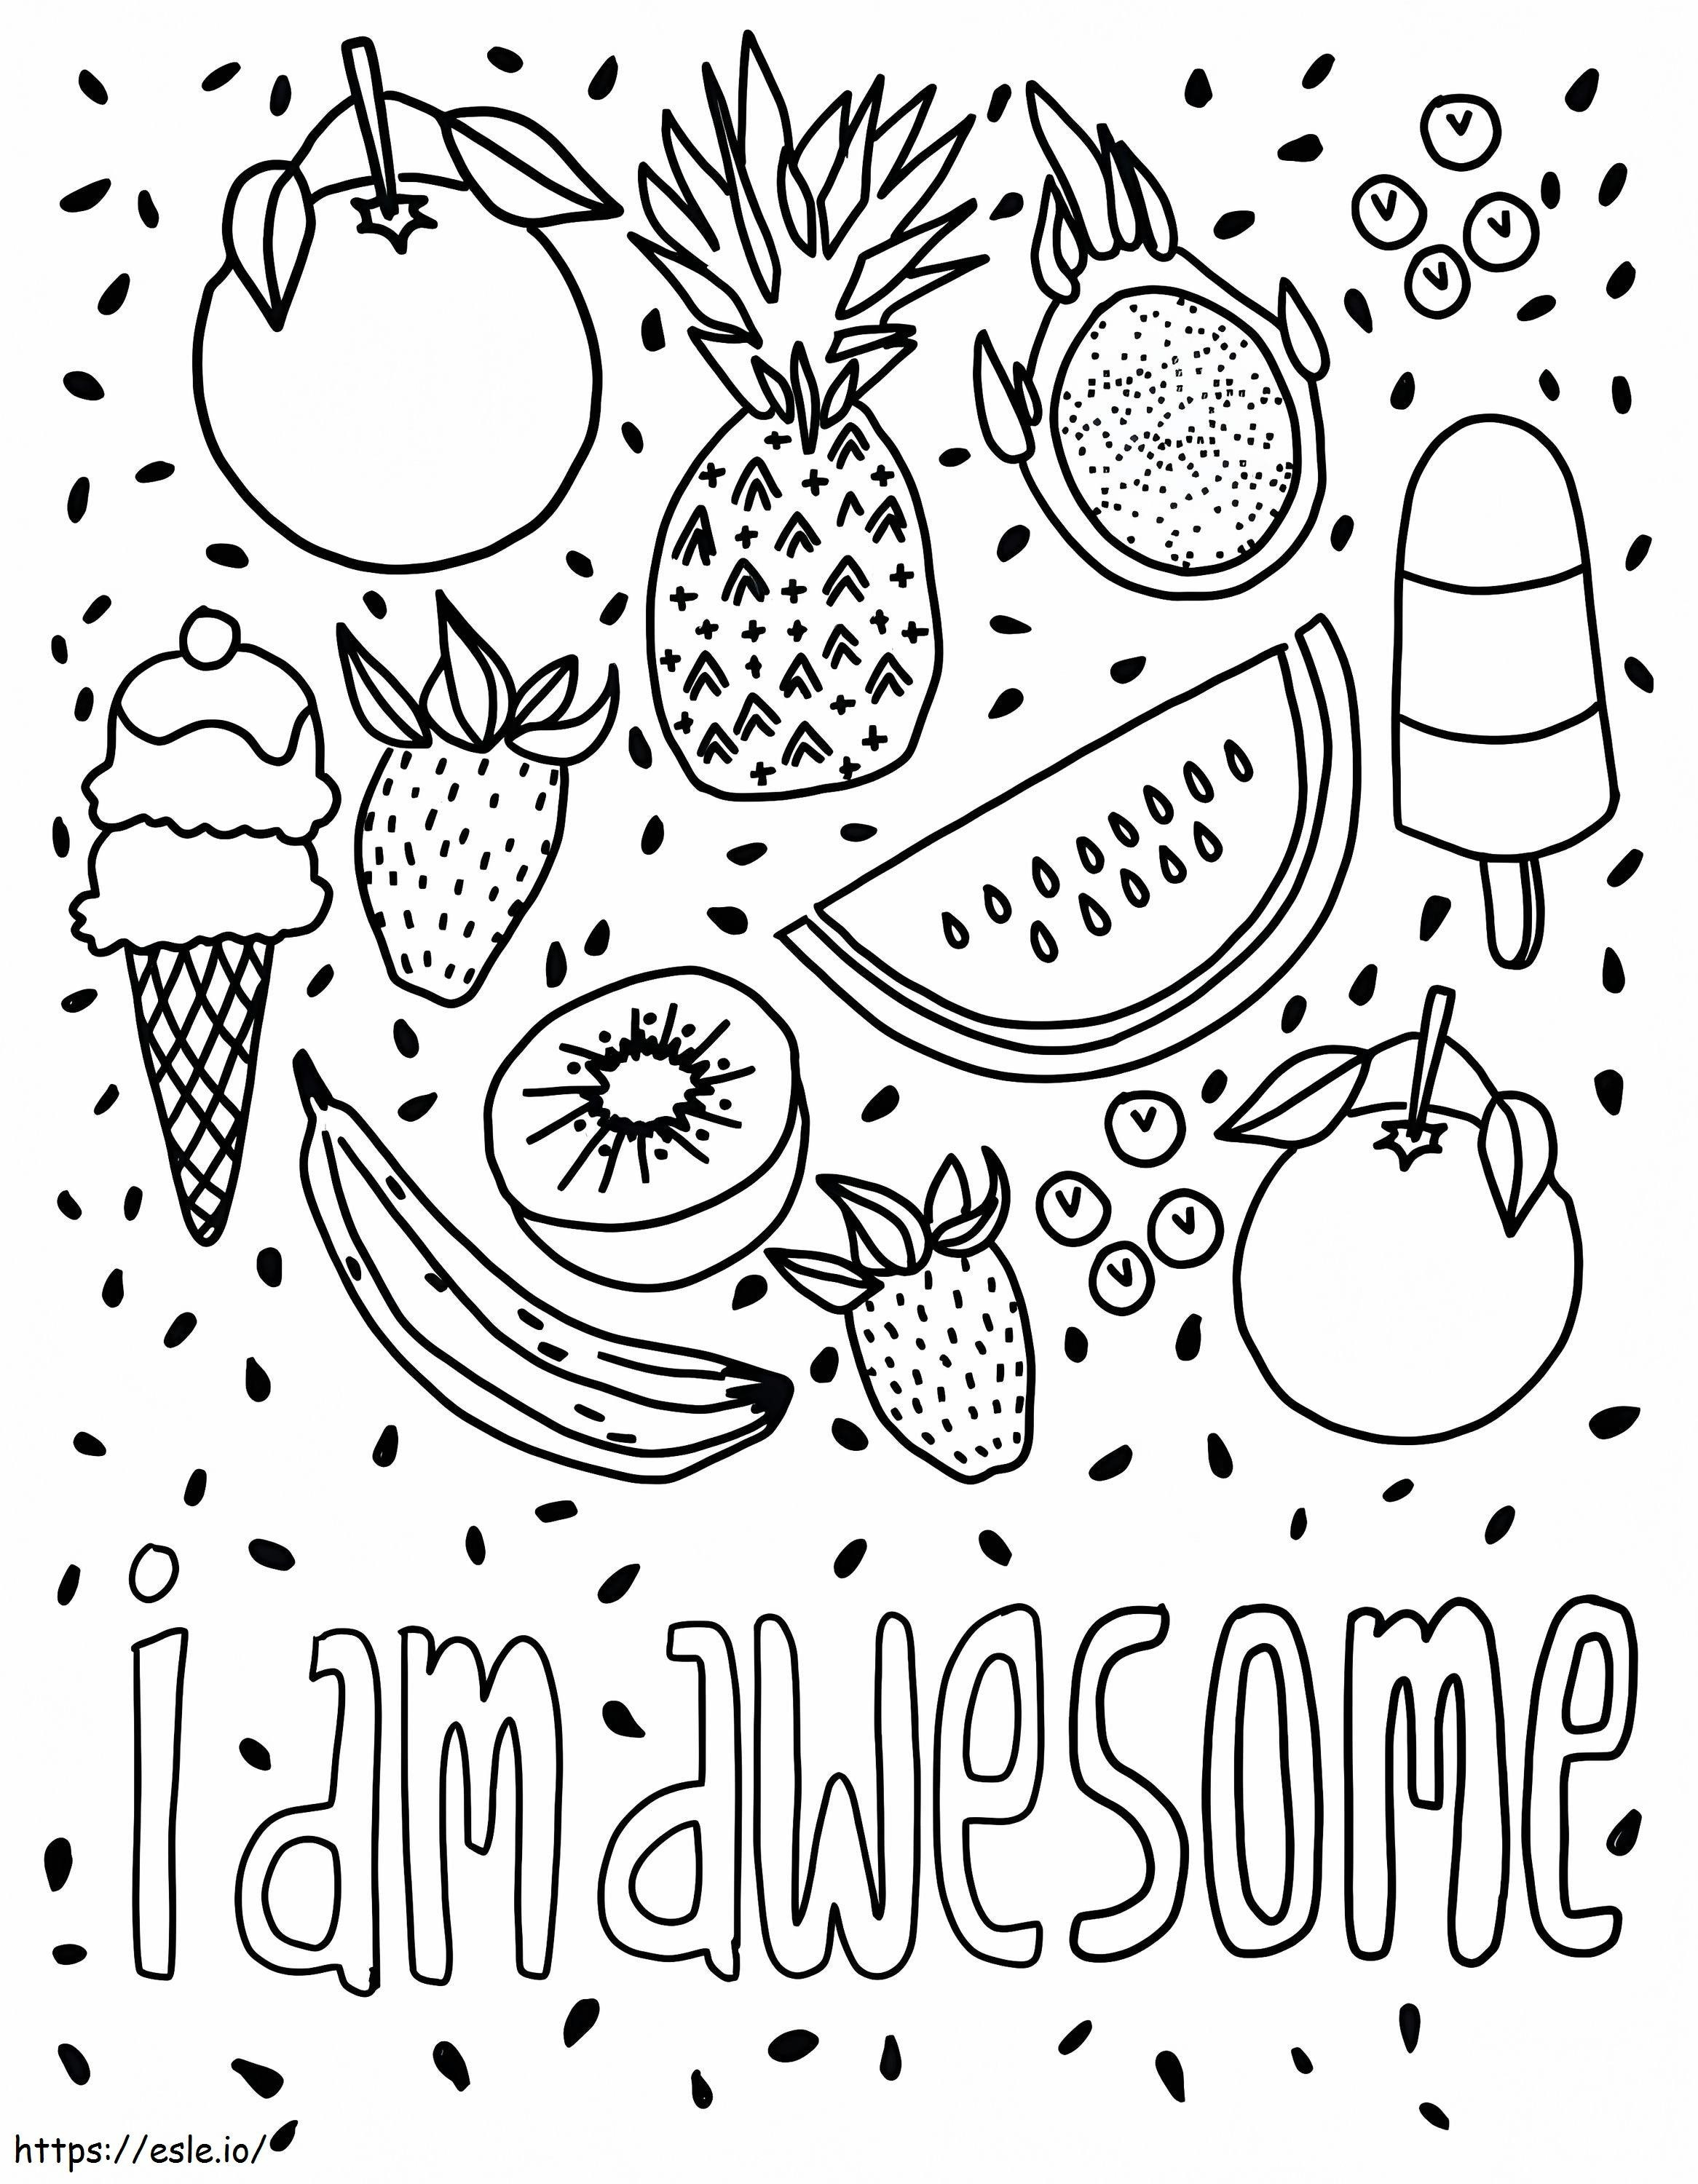 I Am Awesome VSCO Girl coloring page